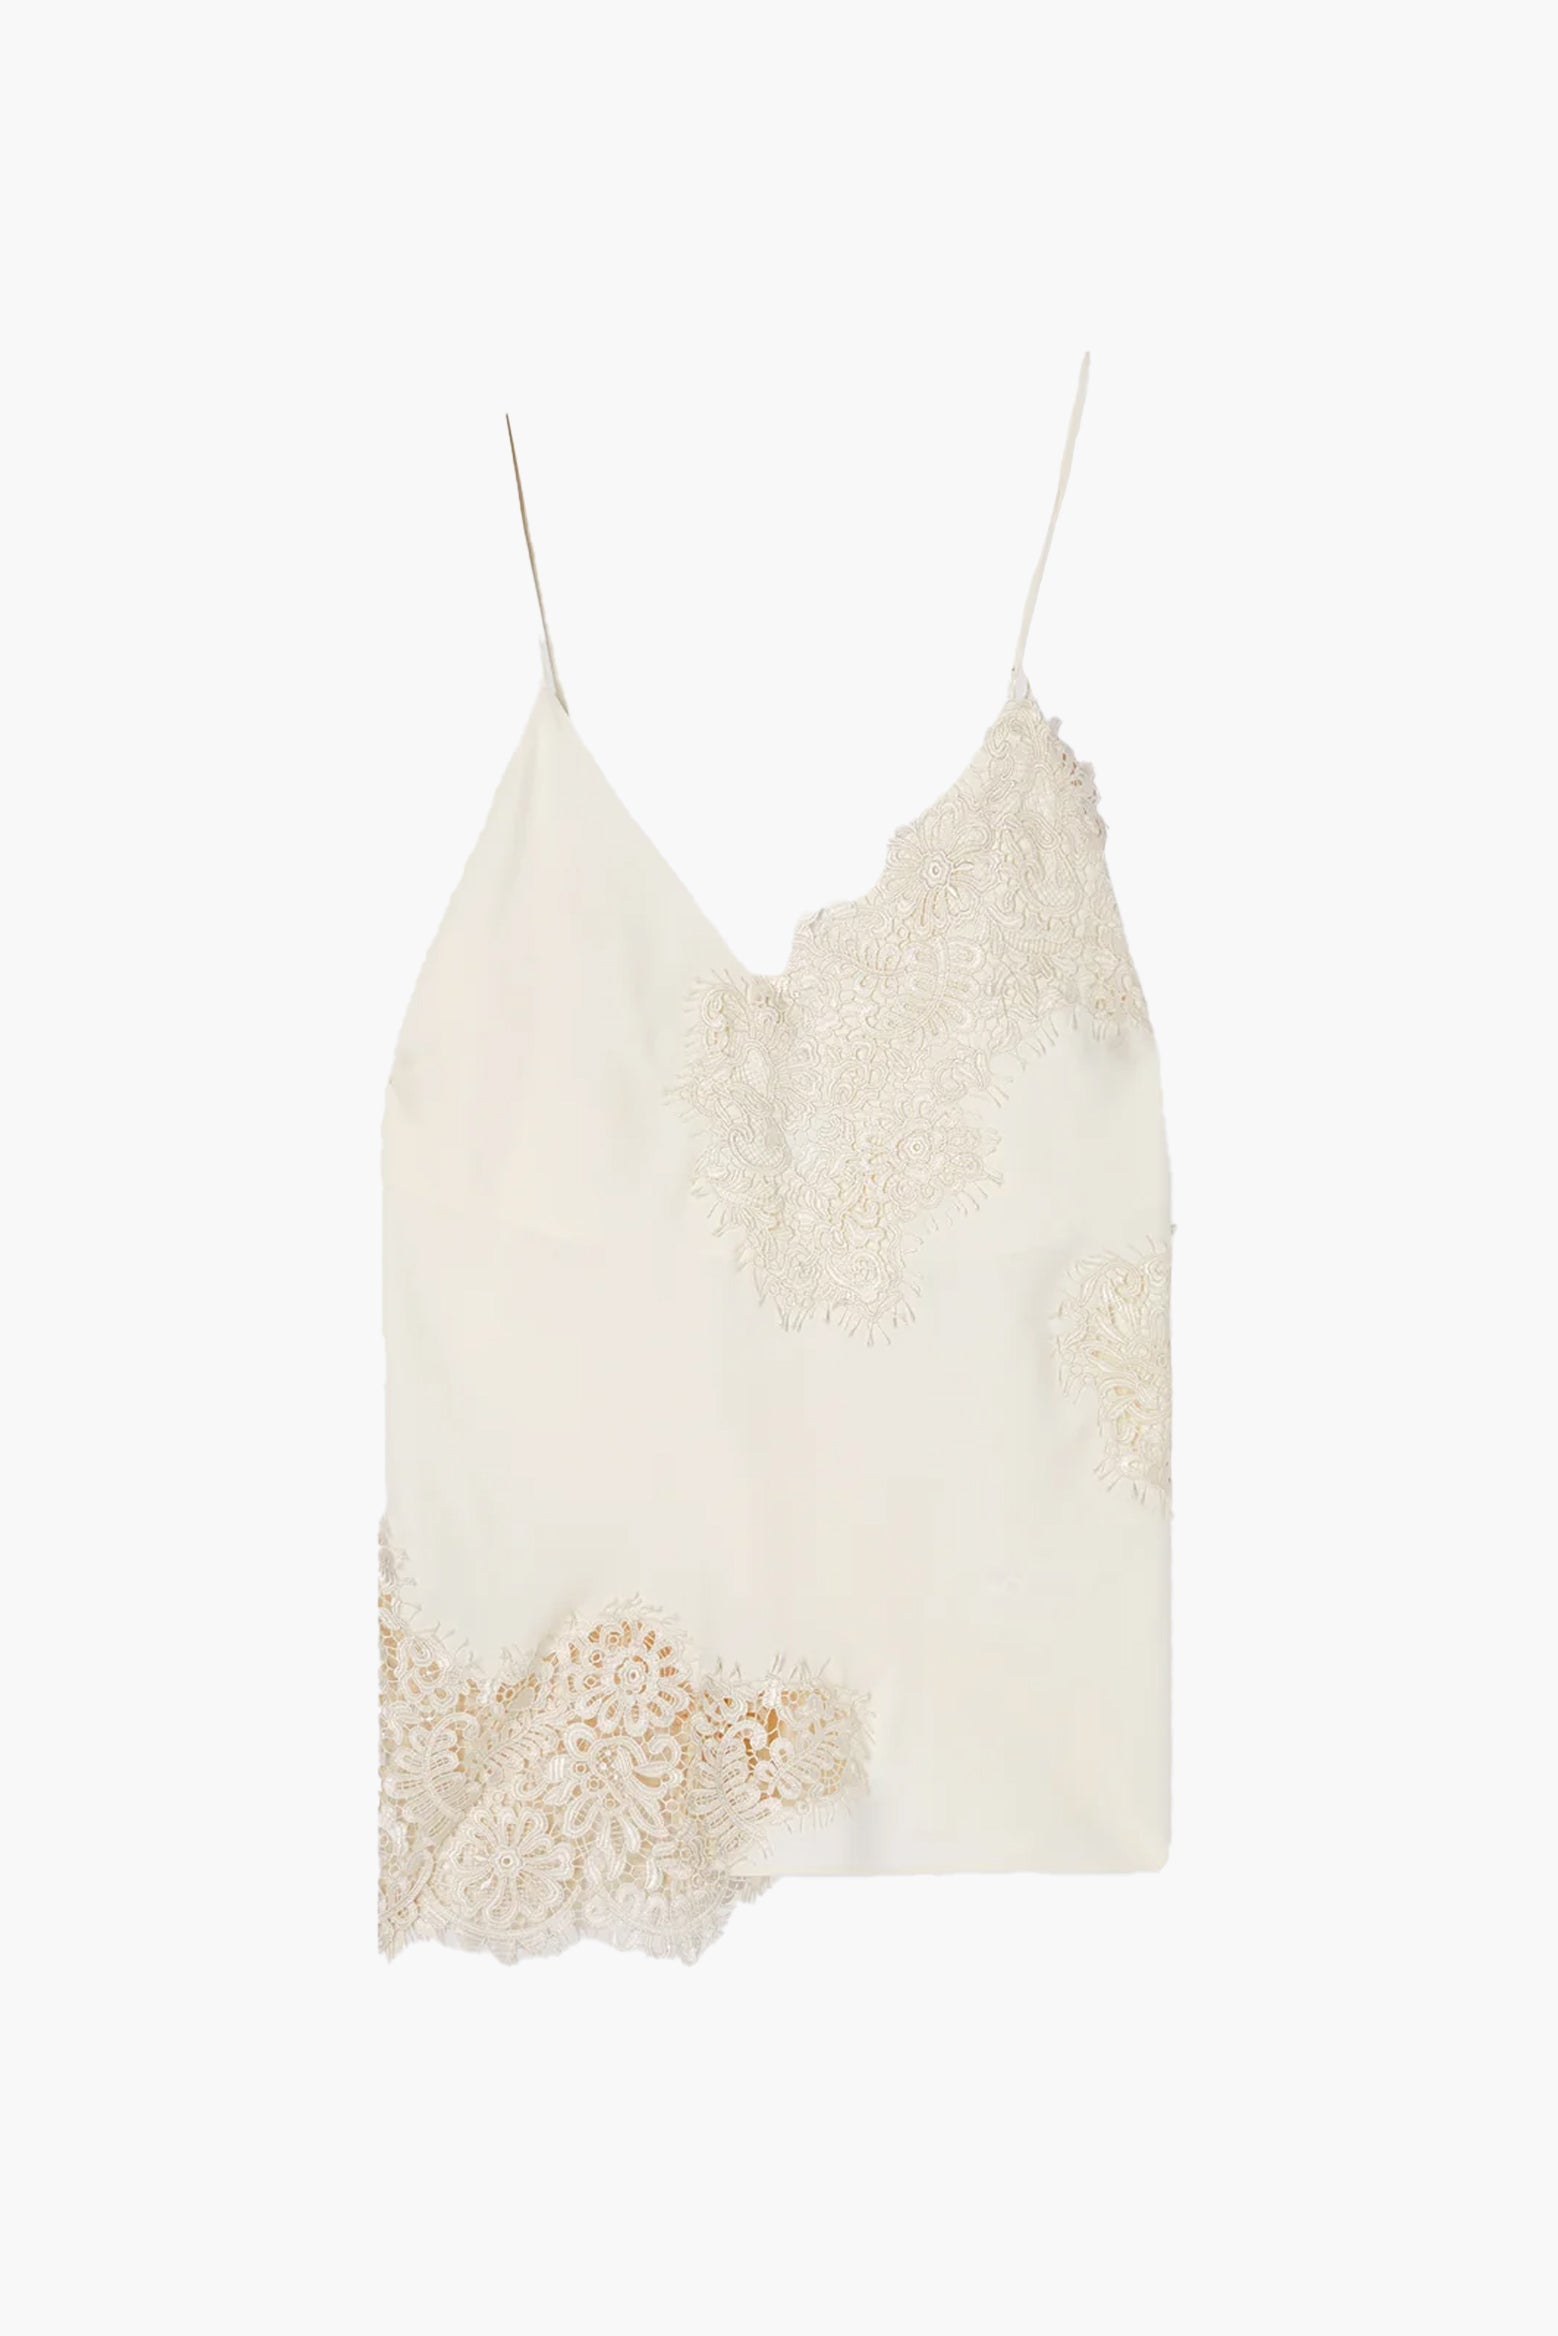 The Rohe Lace Camisole Top in Cream available at The New Trend Australia